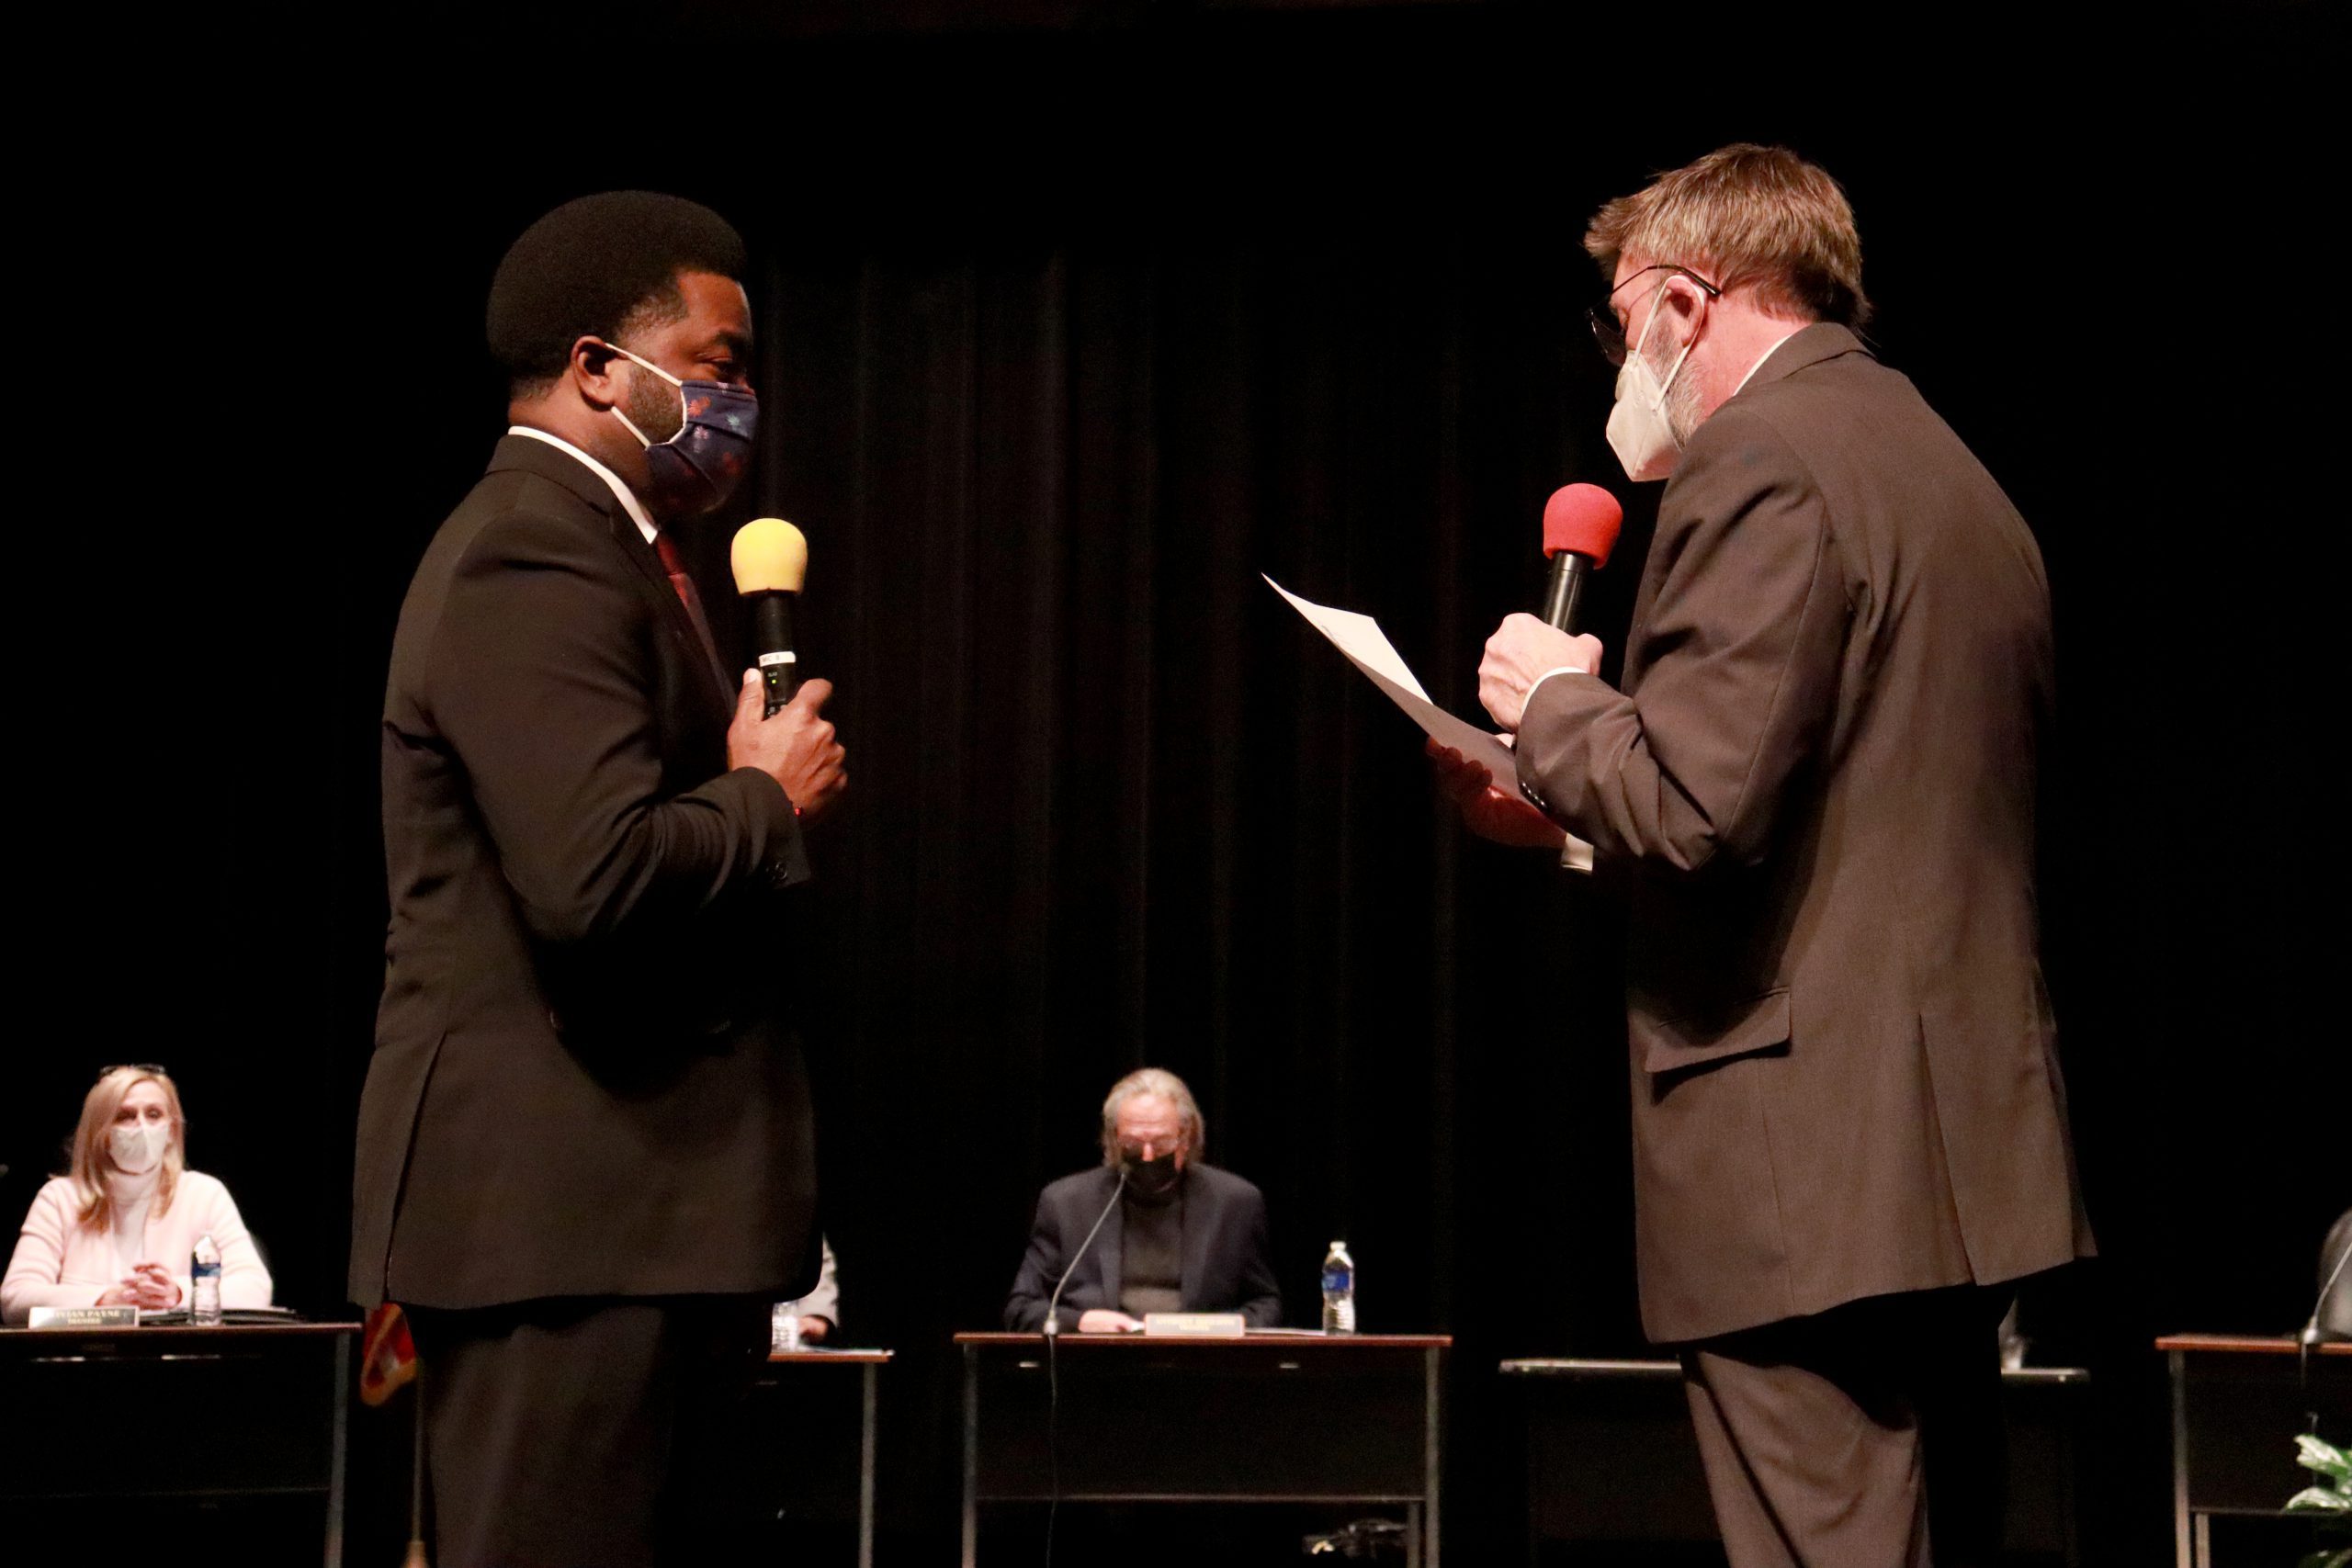 Prince Reed (pictured left) was sworn in as South Suburban College Trustee